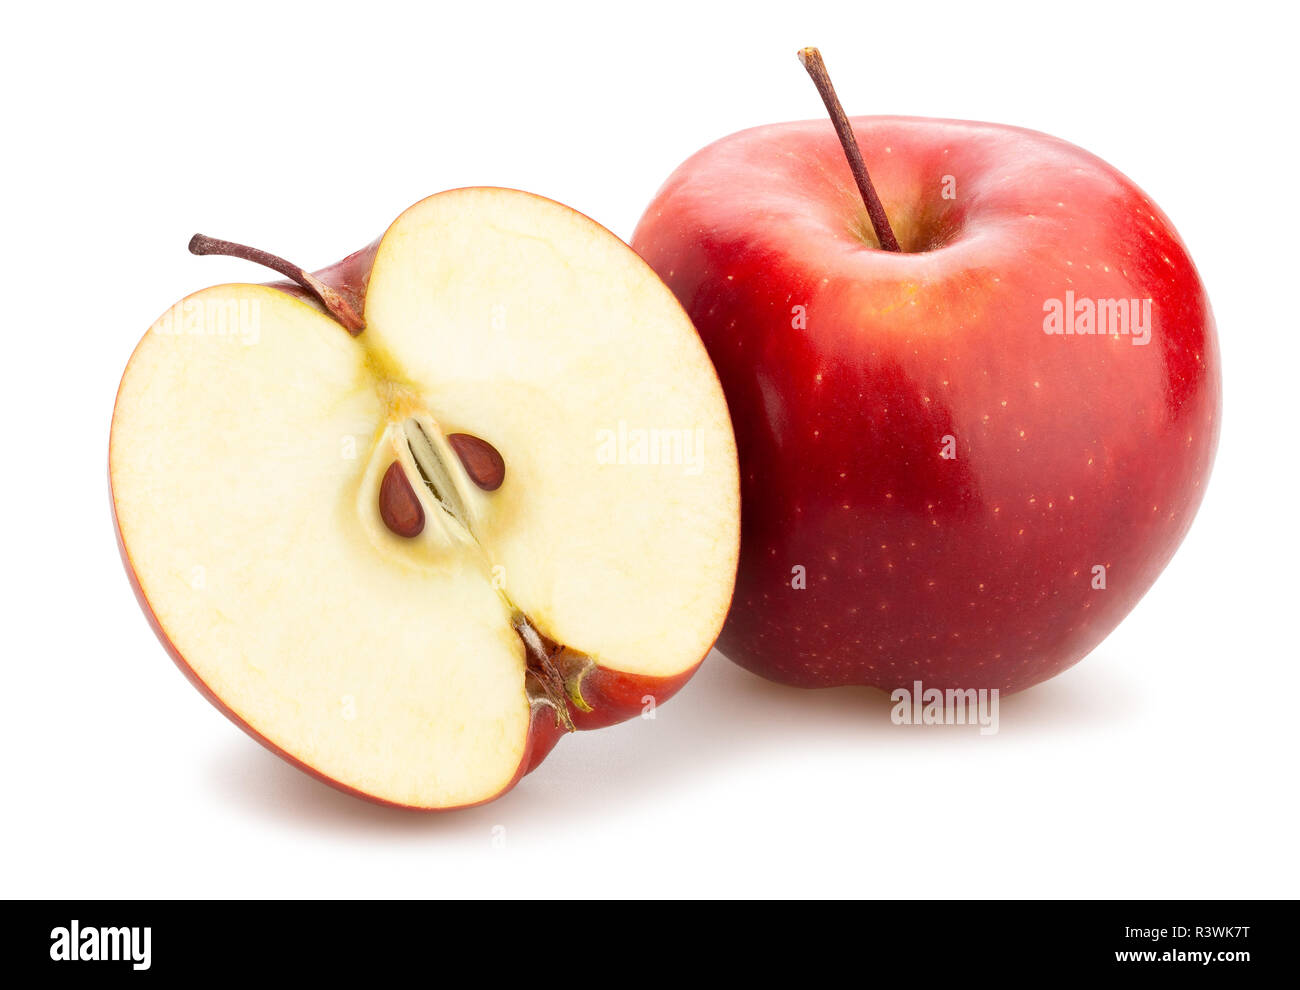 https://c8.alamy.com/comp/R3WK7T/sliced-red-delicious-apple-path-isolated-R3WK7T.jpg